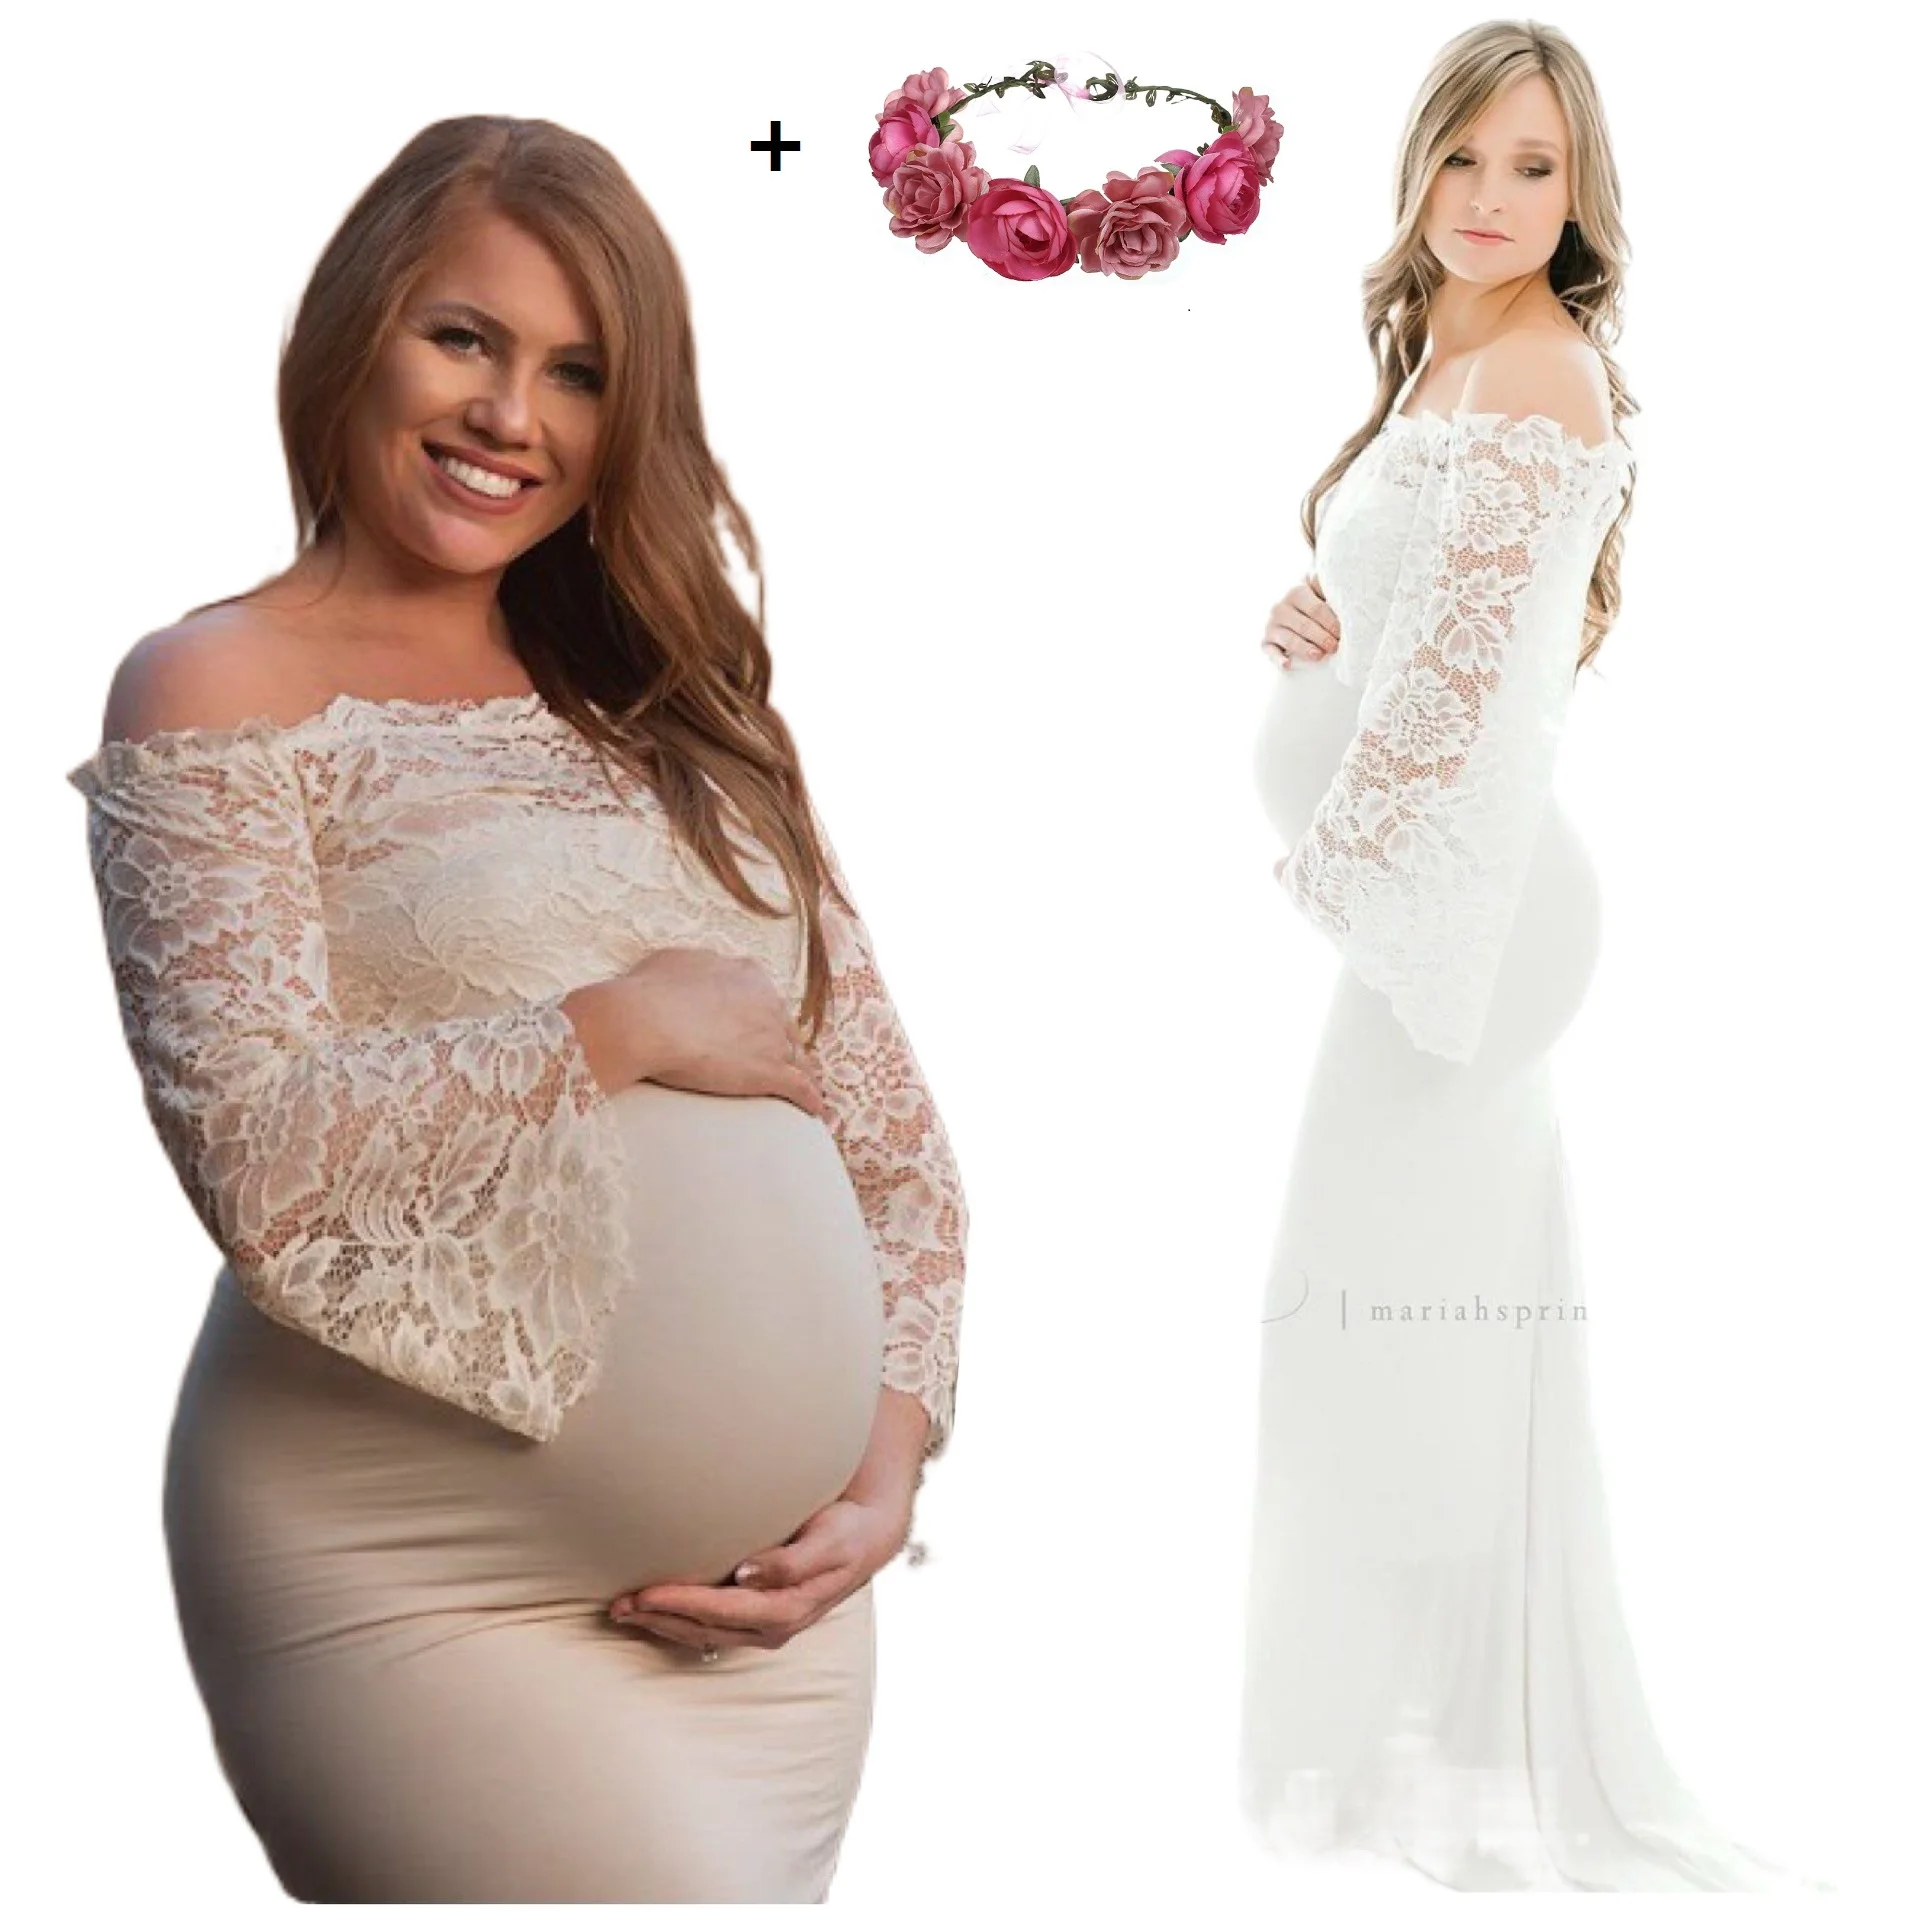 Enlarge Pregnant Women Long Sleeve Lace Long Maxi Dress Long Maxi Maternity Dress Photography Props Pregnant Lace Dress Gown with Wreath